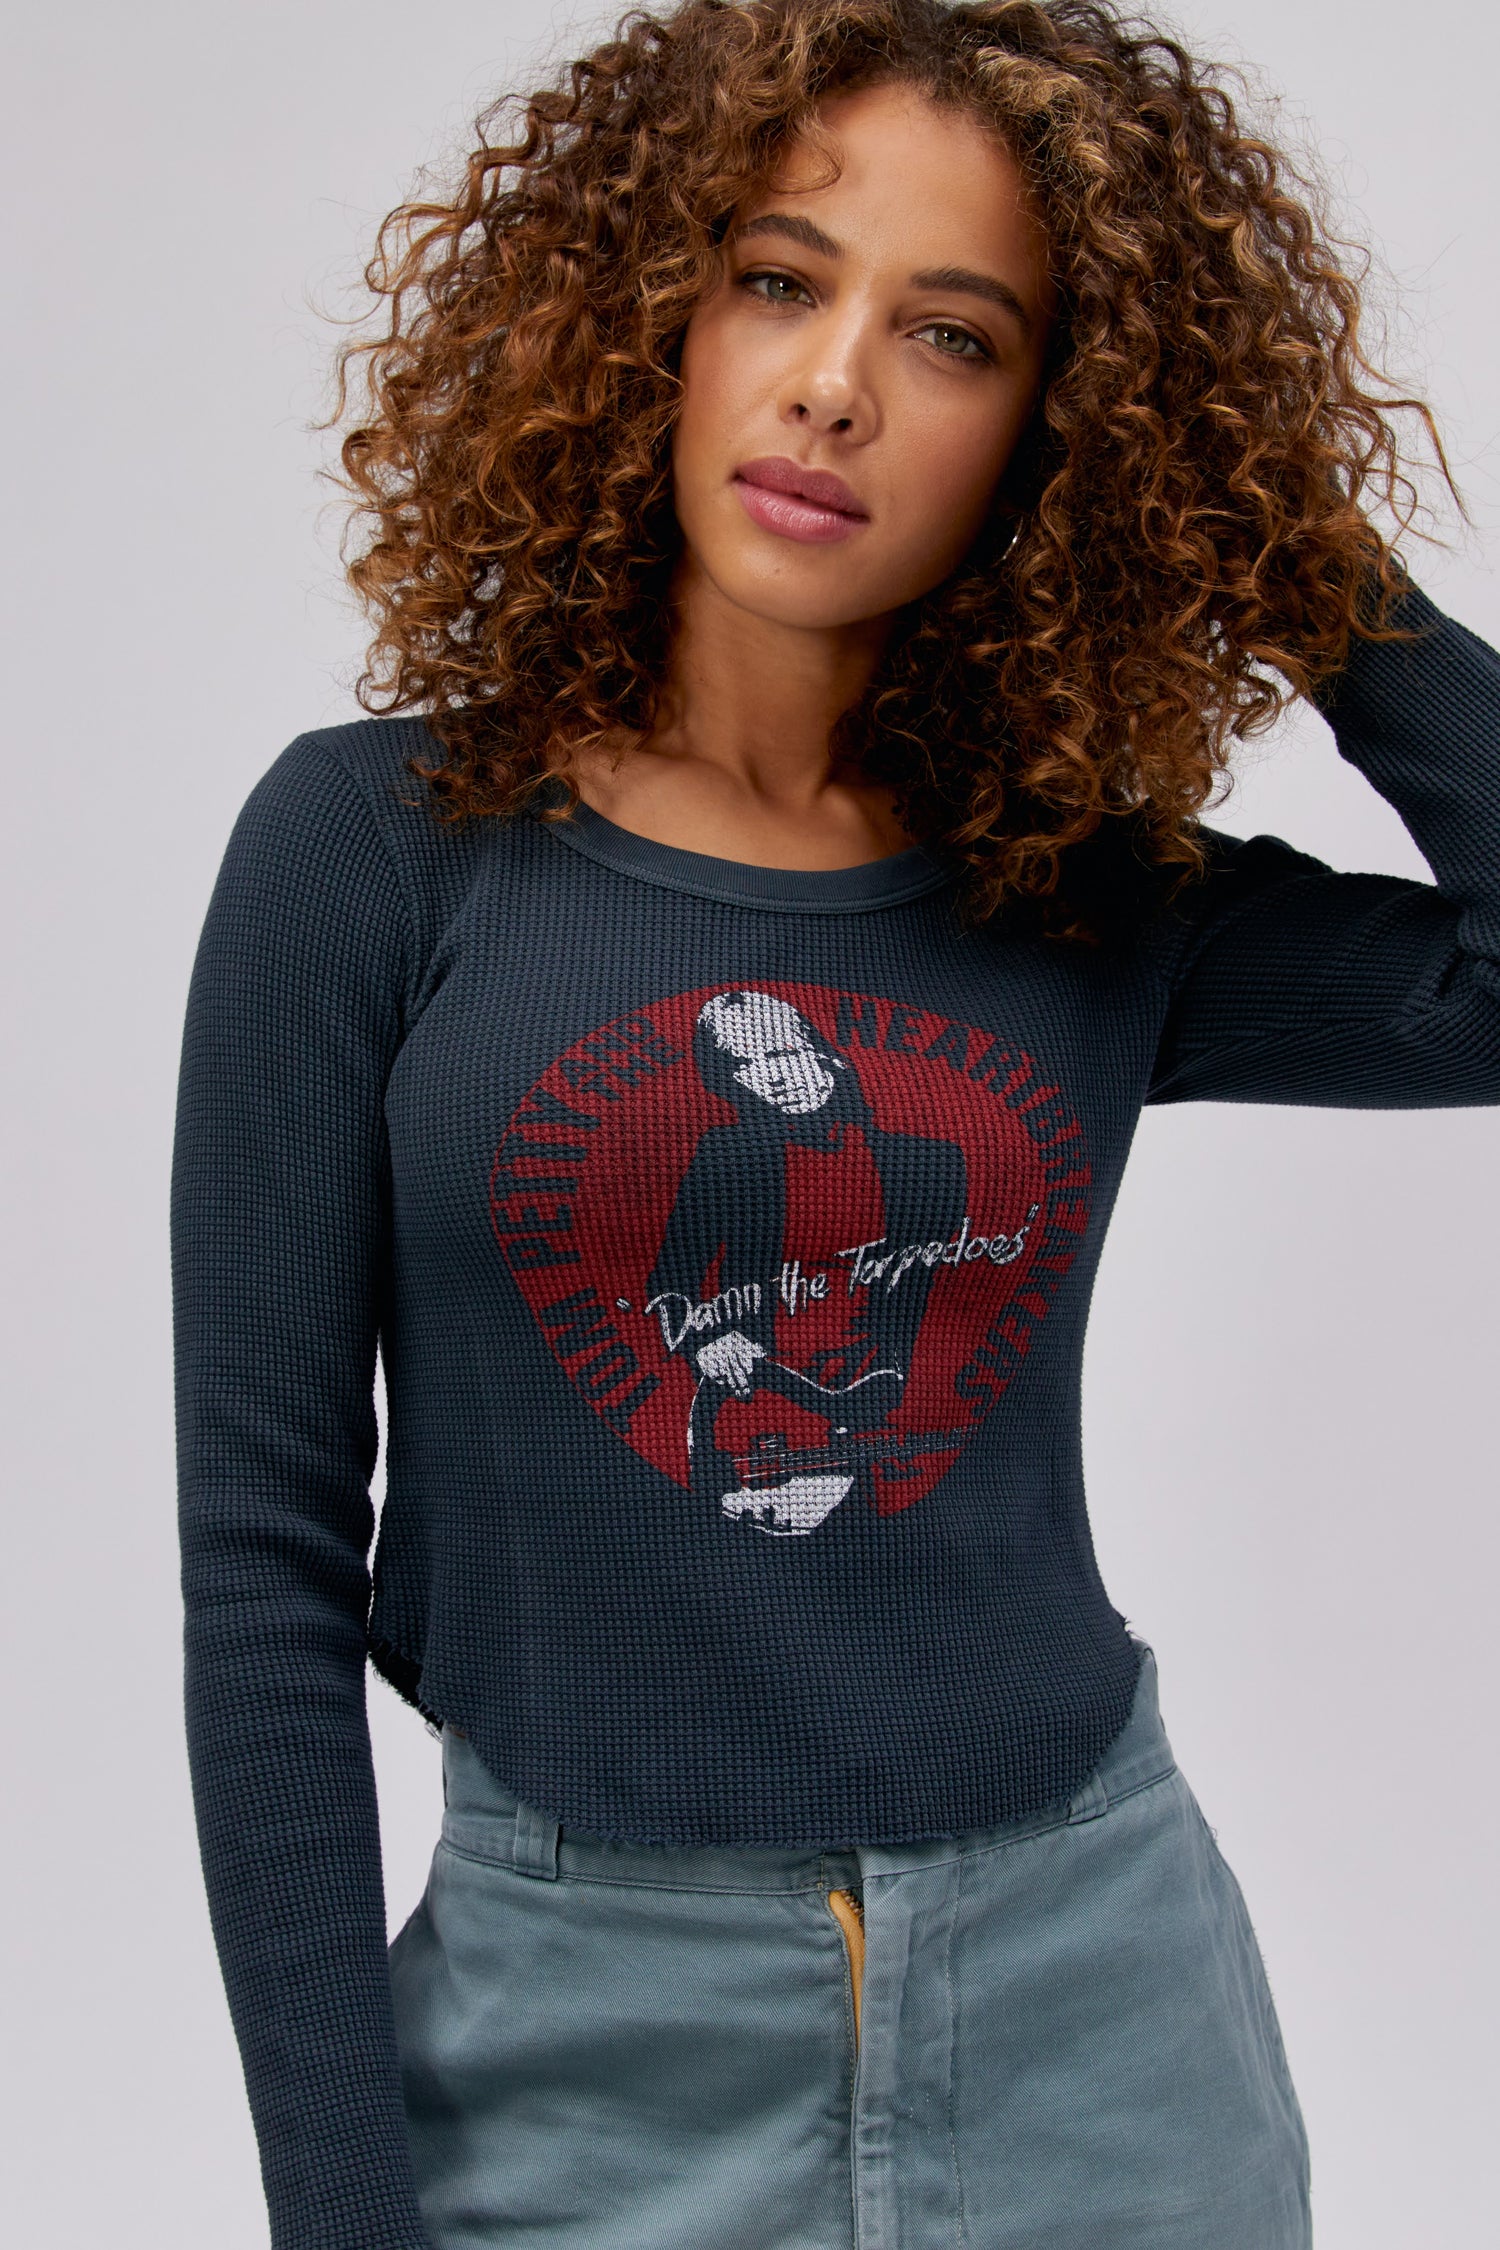 Women's Thermal Long Sleeve Tops - Roots